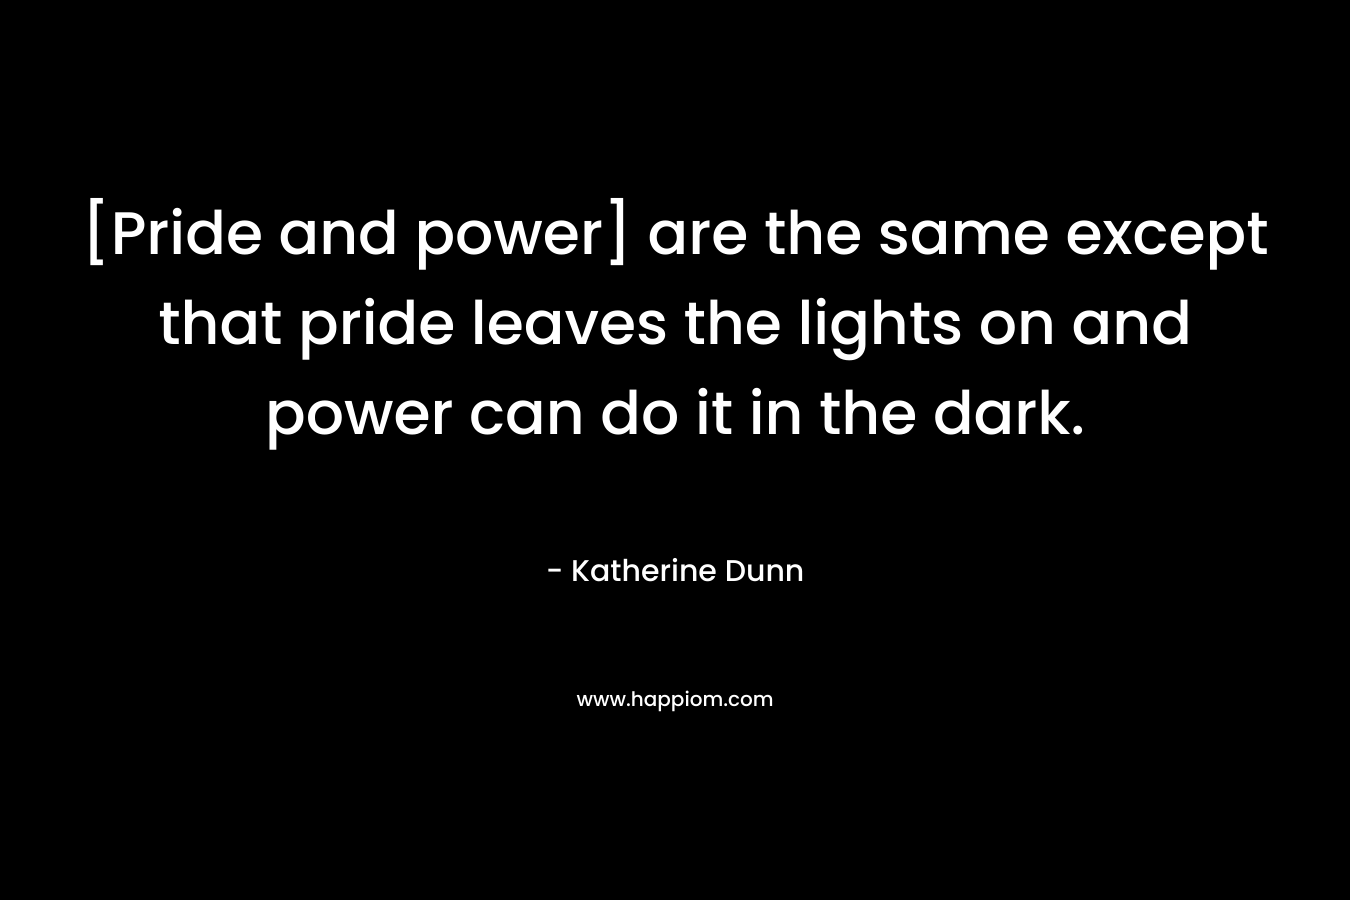 [Pride and power] are the same except that pride leaves the lights on and power can do it in the dark.